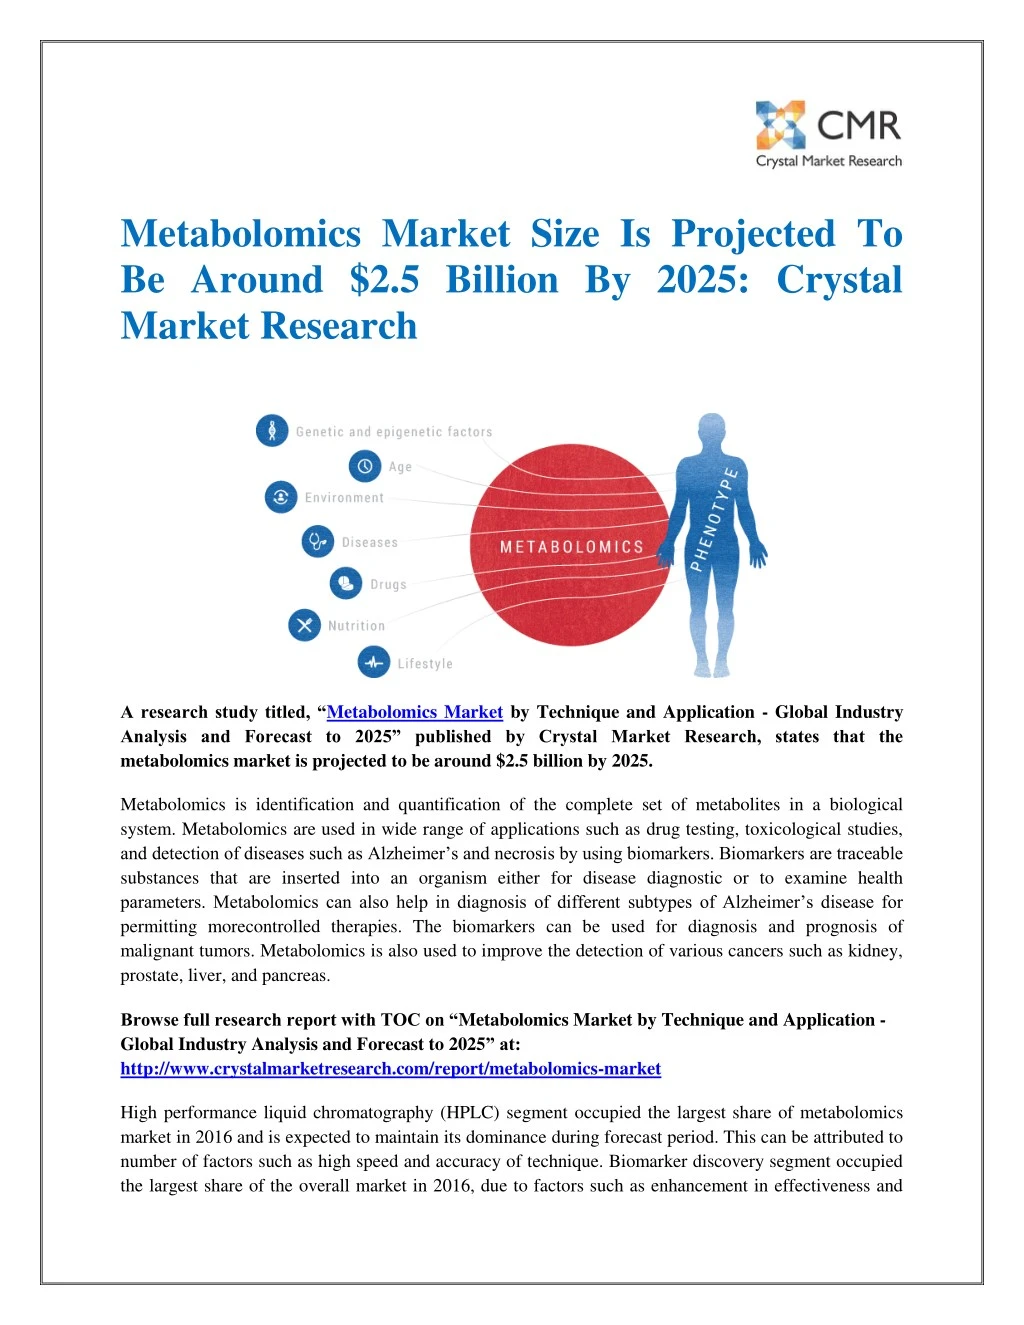 metabolomics market size is projected